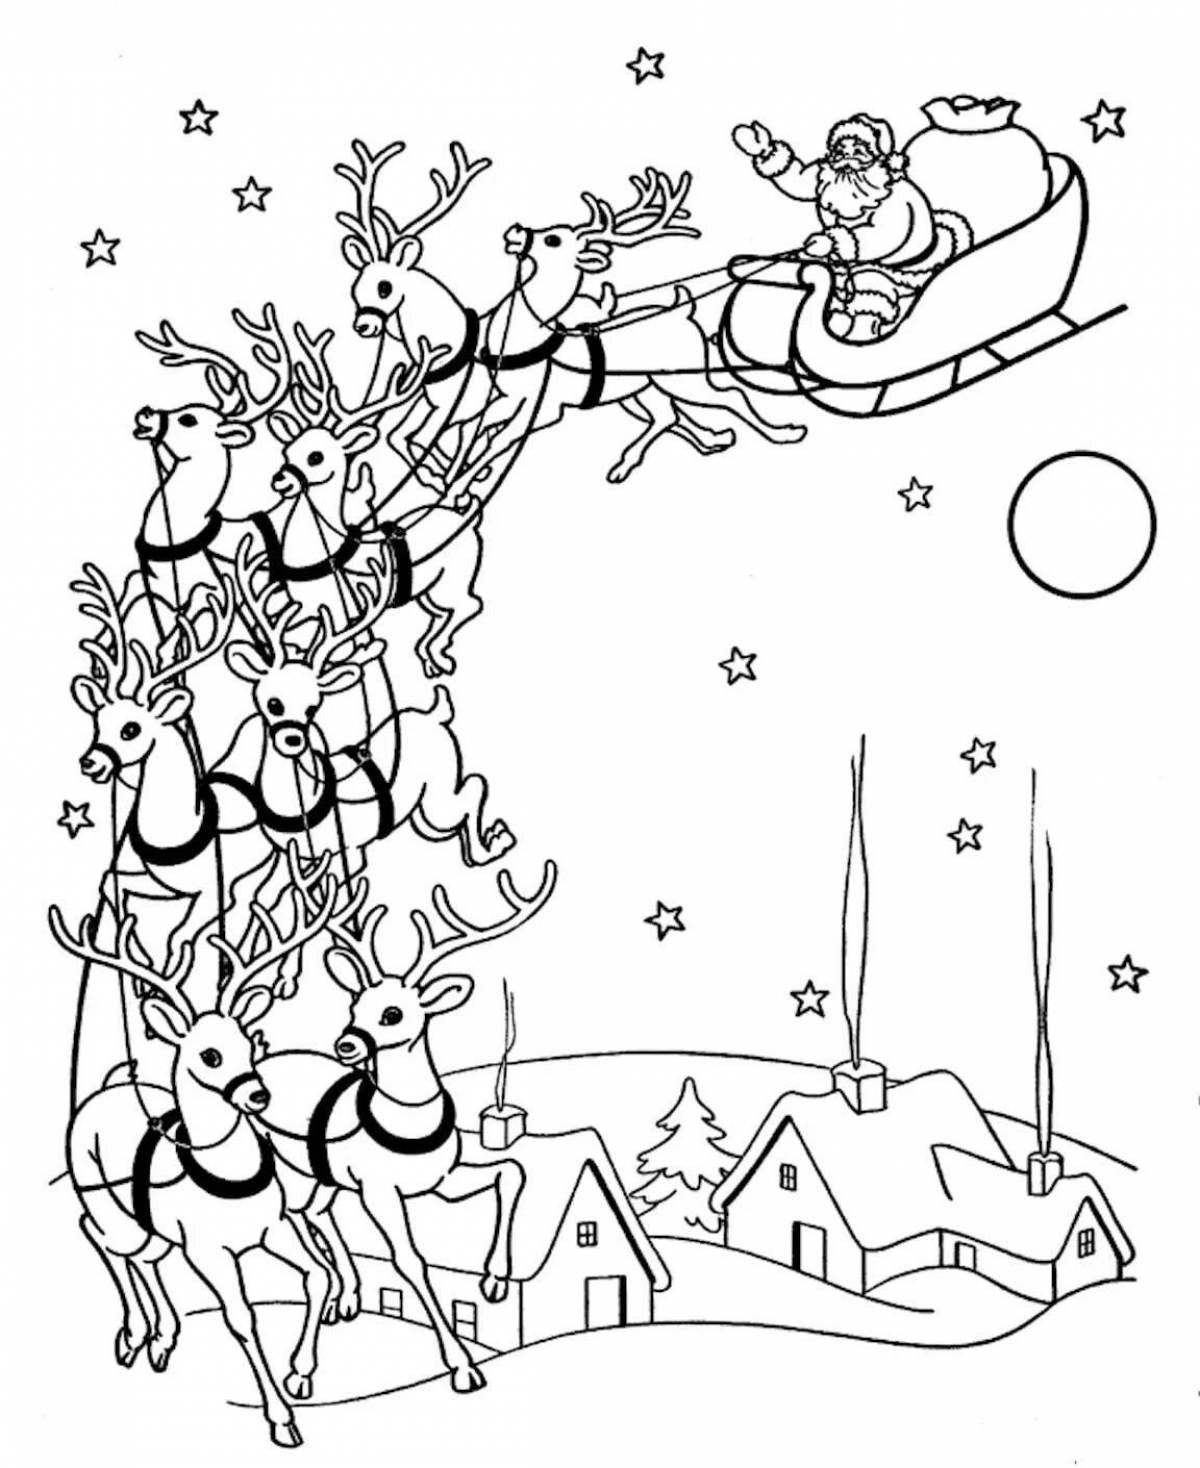 Coloring page adorable santa claus and reindeer